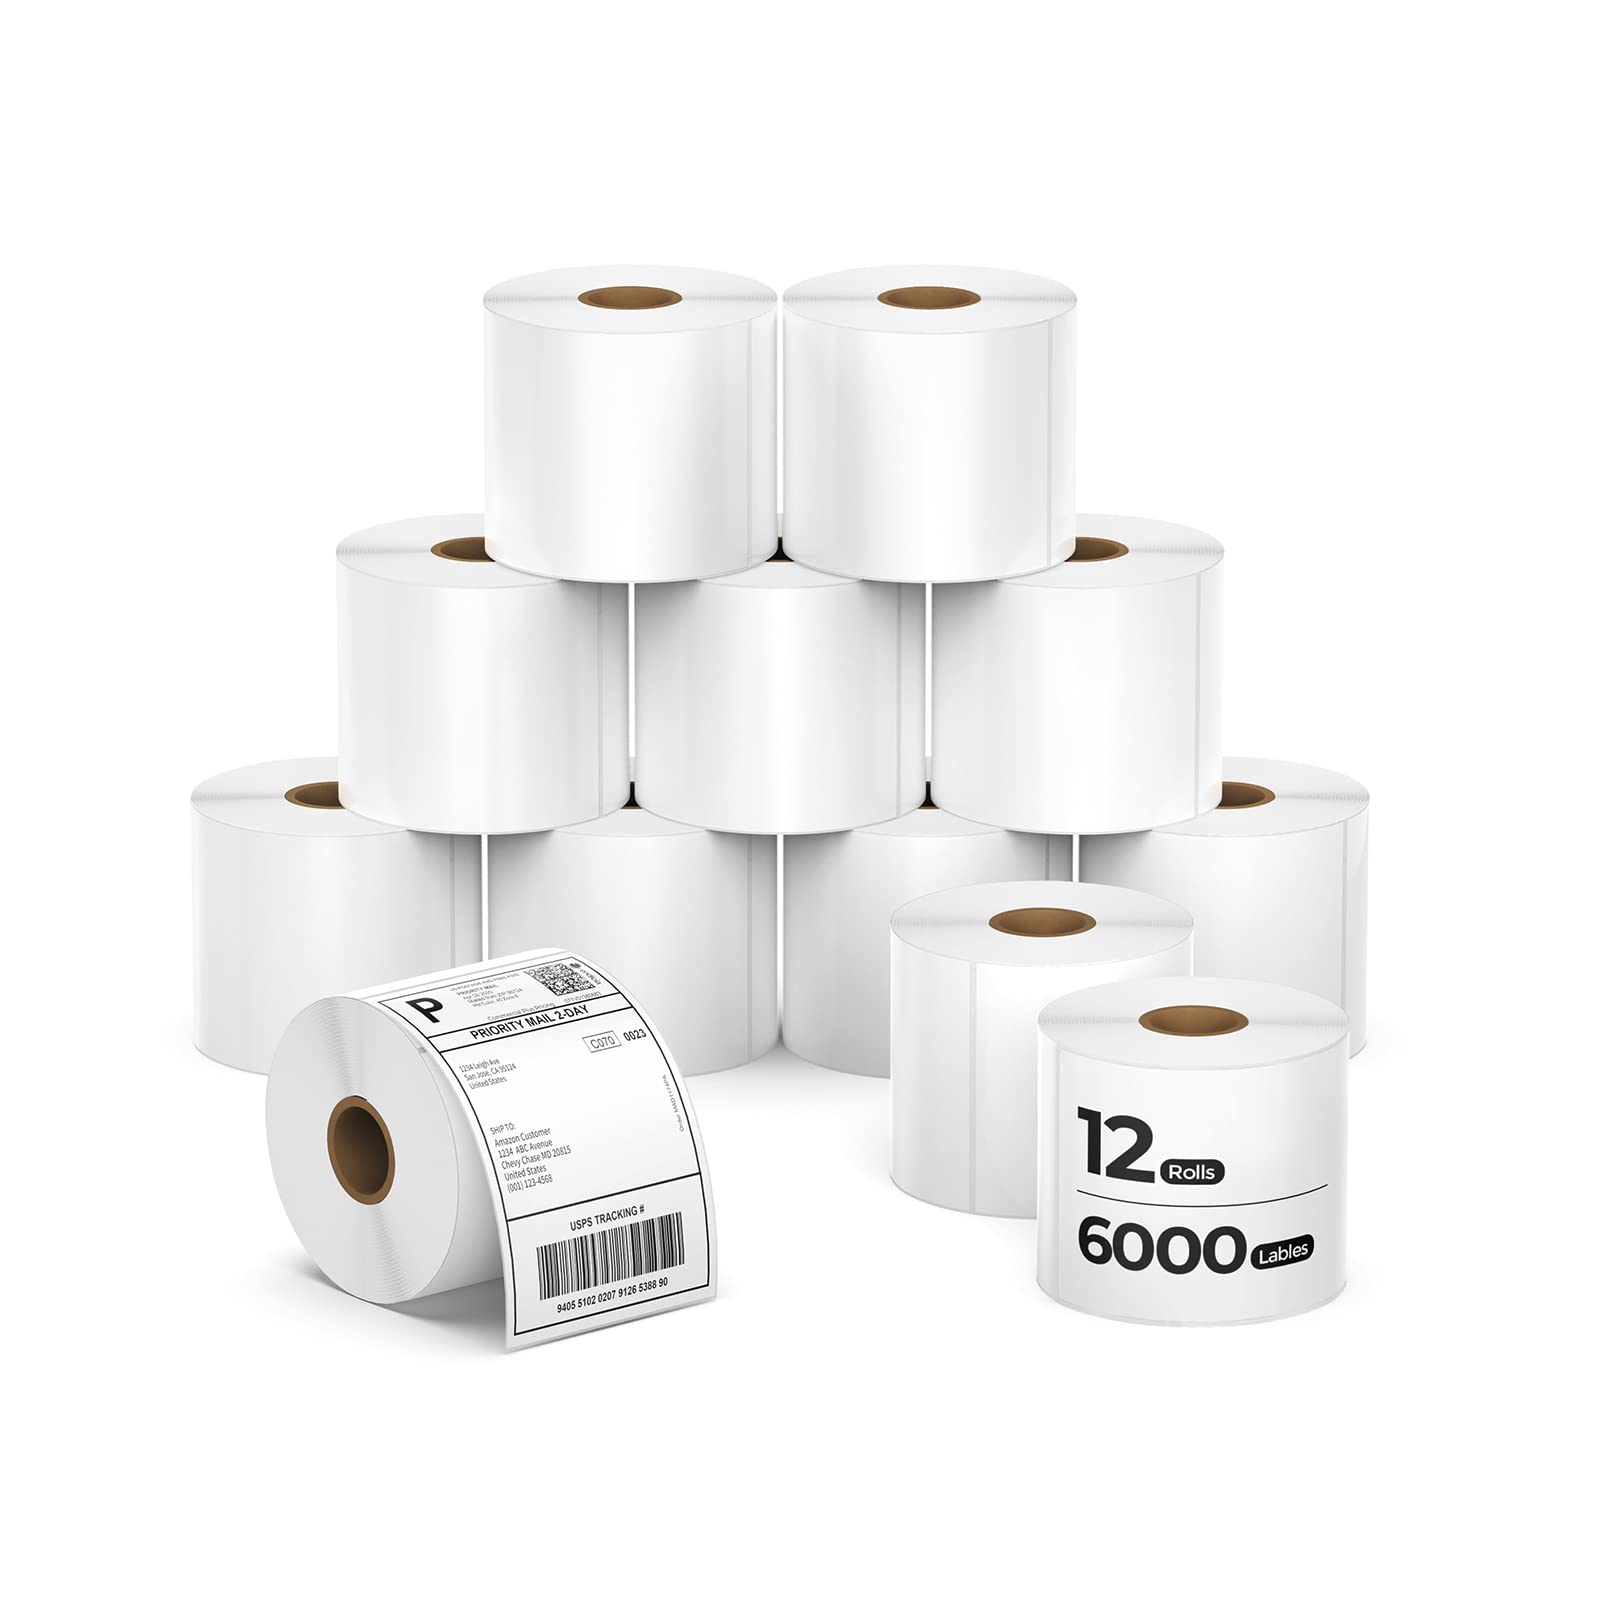 MUNBYN 4x6 Inch Direct Thermal Labels, 6000 Labels/12 Rolls(500 Pcs per Roll), Shipping Label Paper for Thermal Printers, Perman